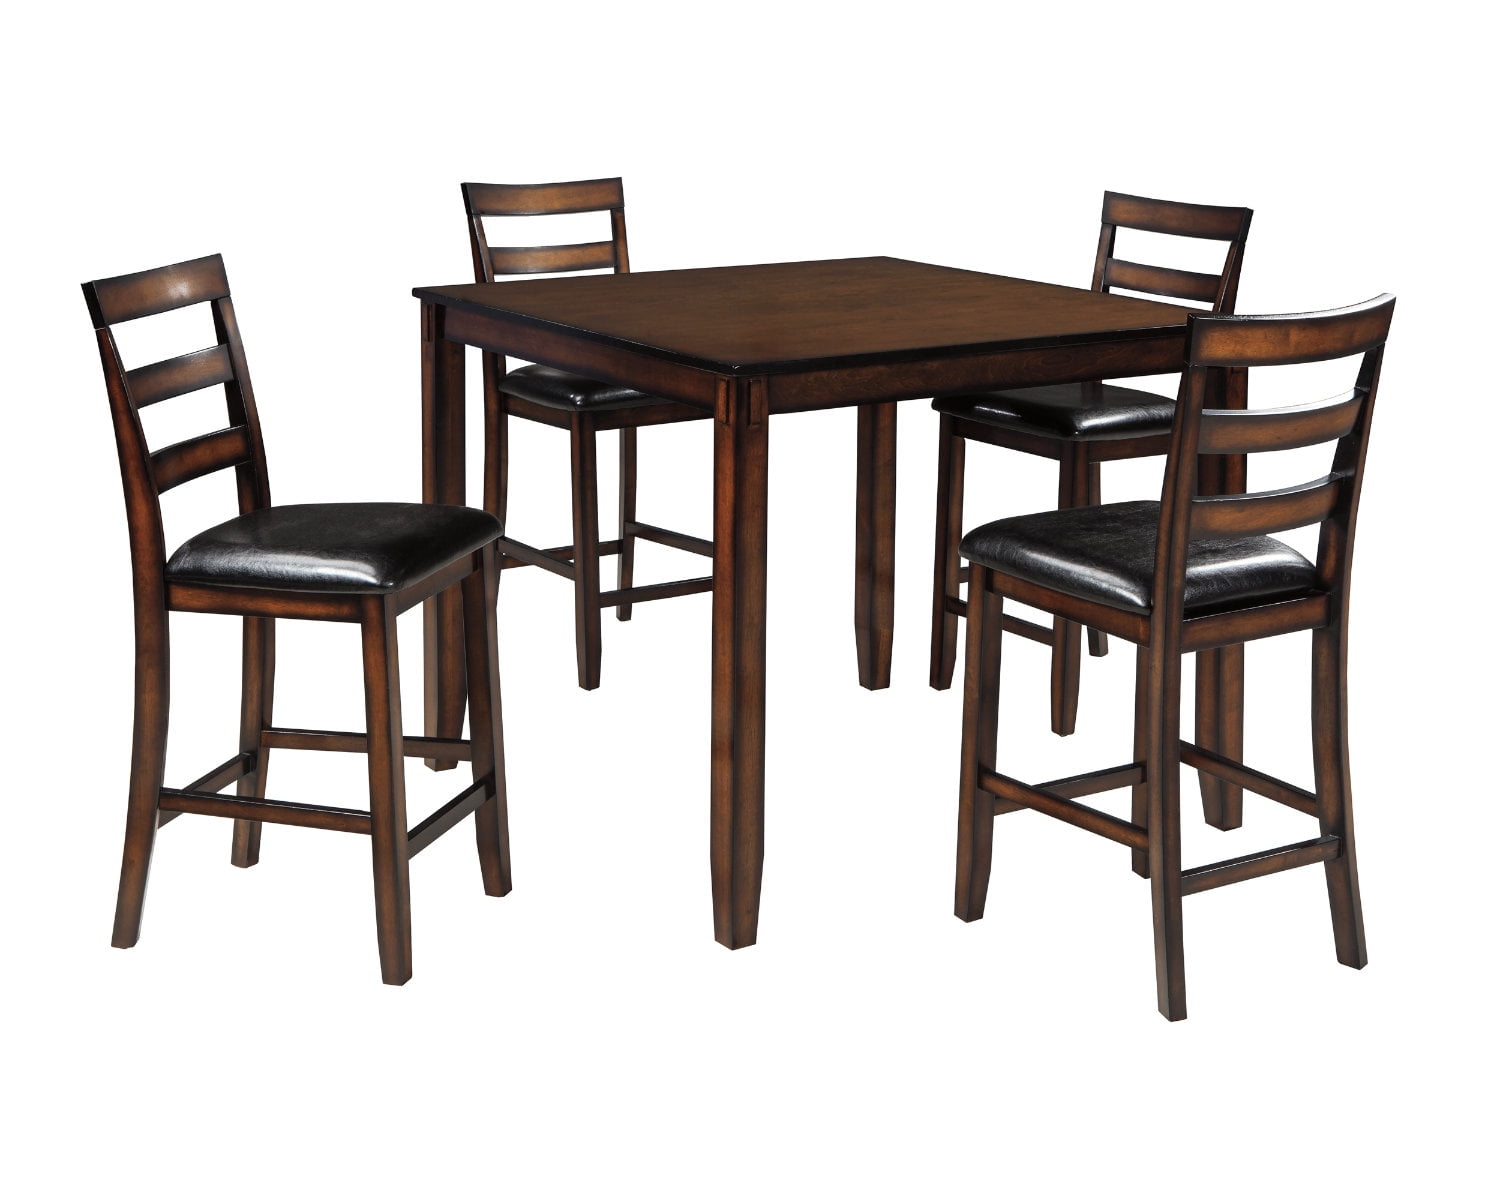 Signature Design By Ashley Coviar Dining Room Counter Table Set Of 5 Casual Style Brown Walmartcom Walmartcom